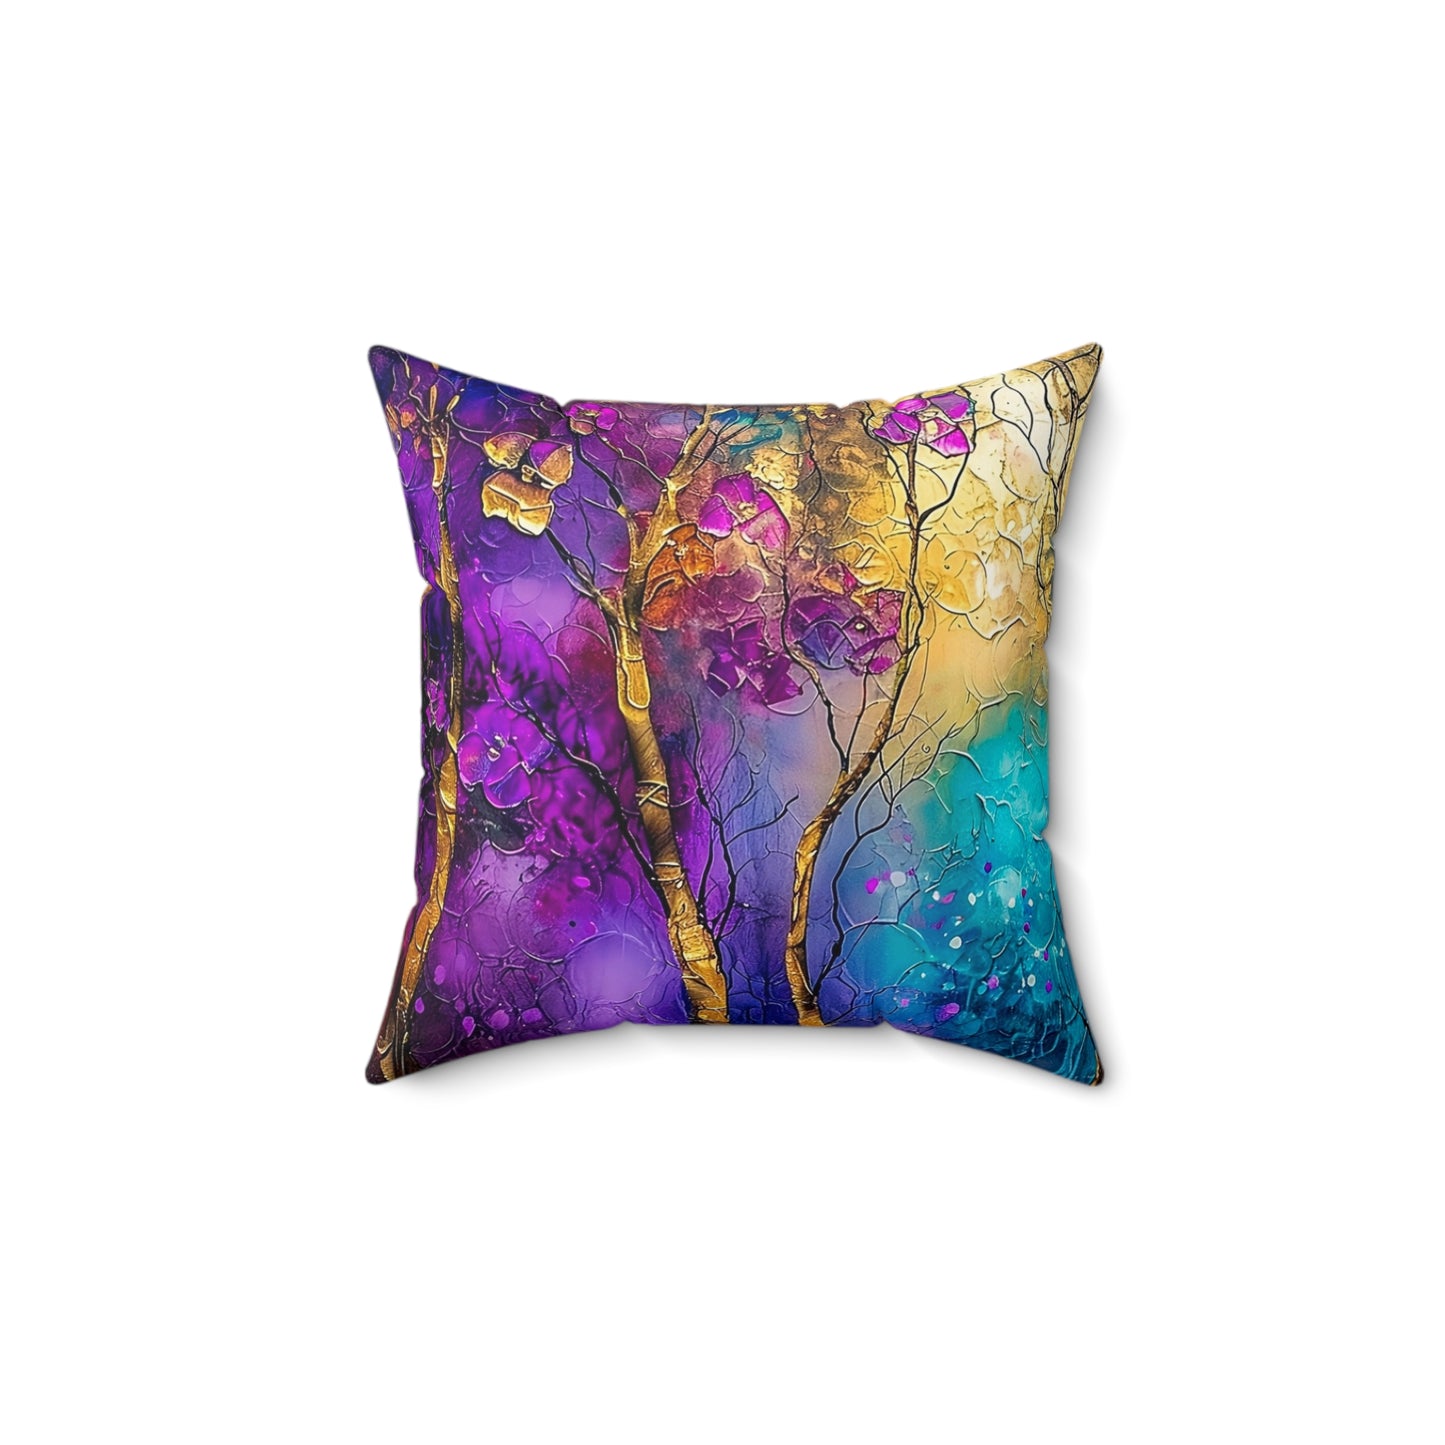 Faux Suede Square Pillow | Colorful Abstract Throw Pillow